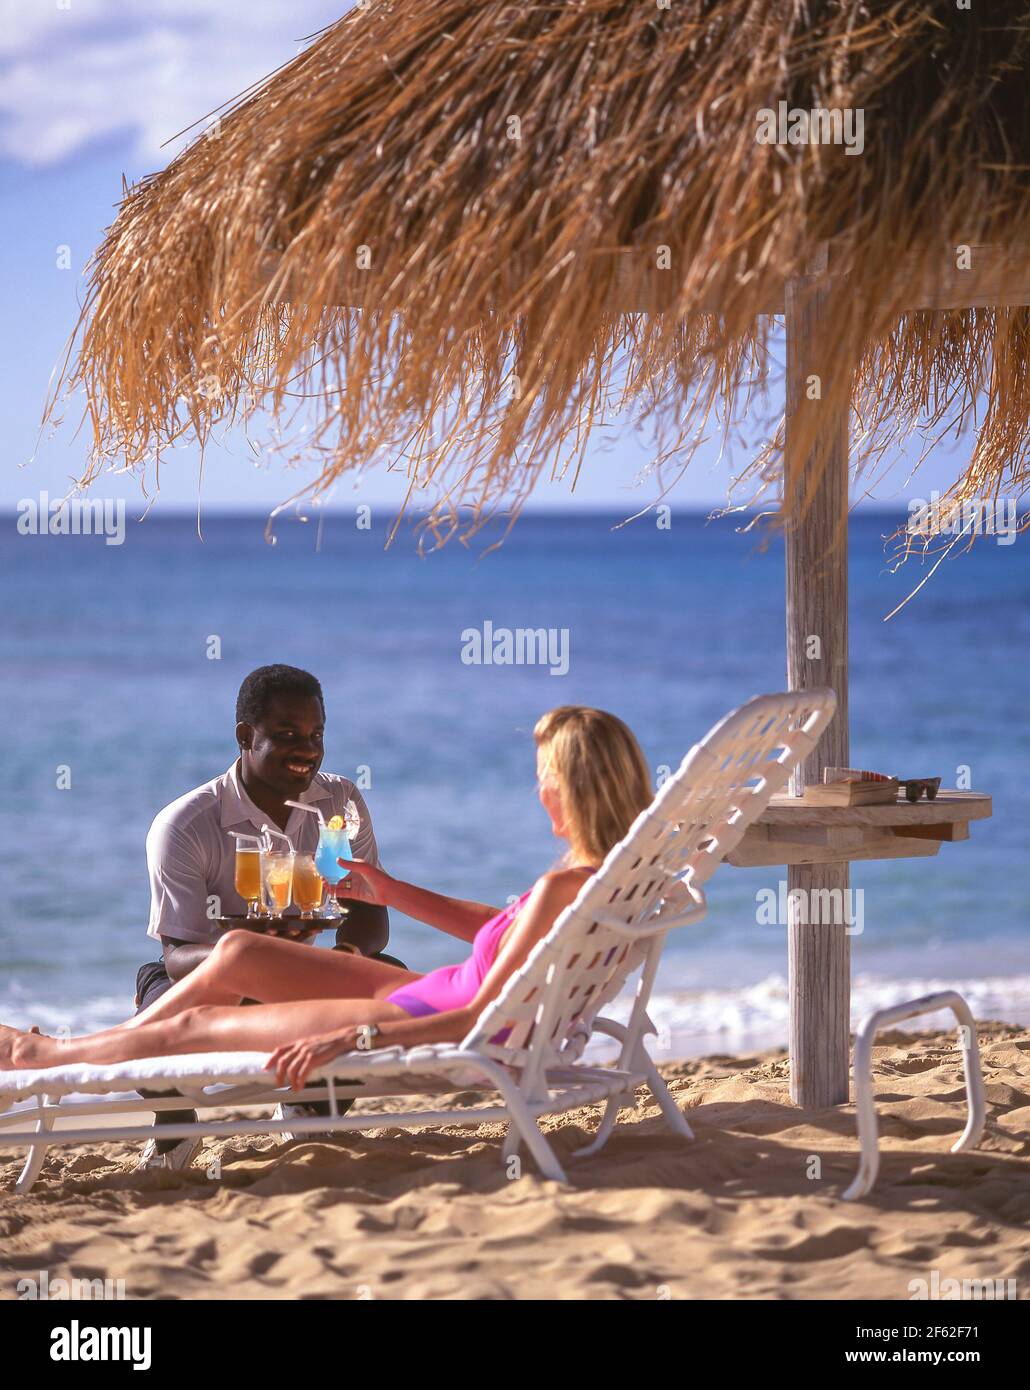 Waiter serving cocktails to woman on beach, Tamarind Cove, Barbados, Lesser Antilles, Caribbean Stock Photo